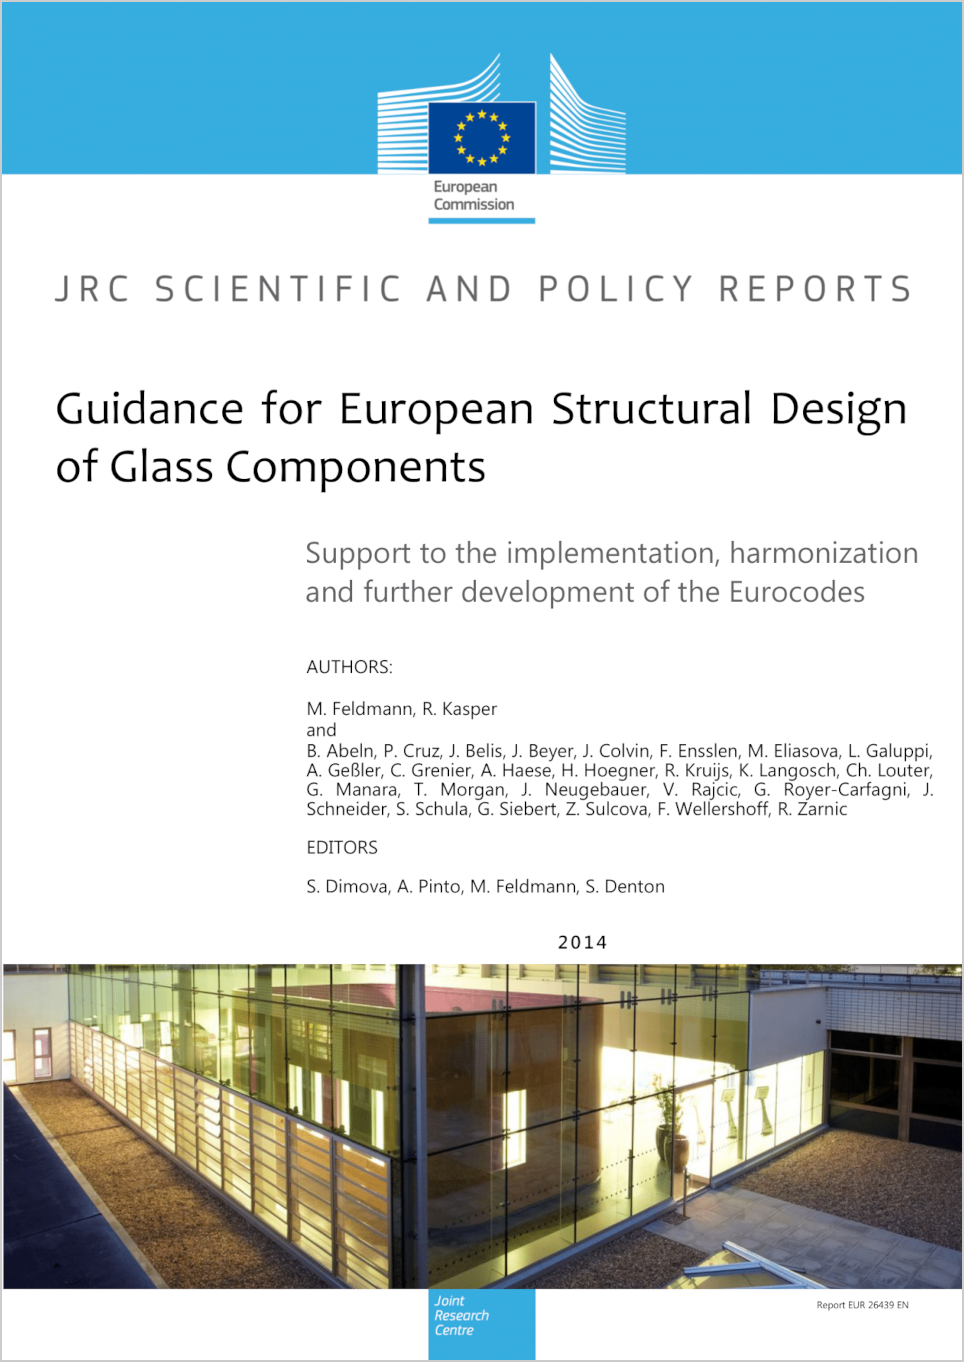 Guidance for European Structural Design of Glass Components